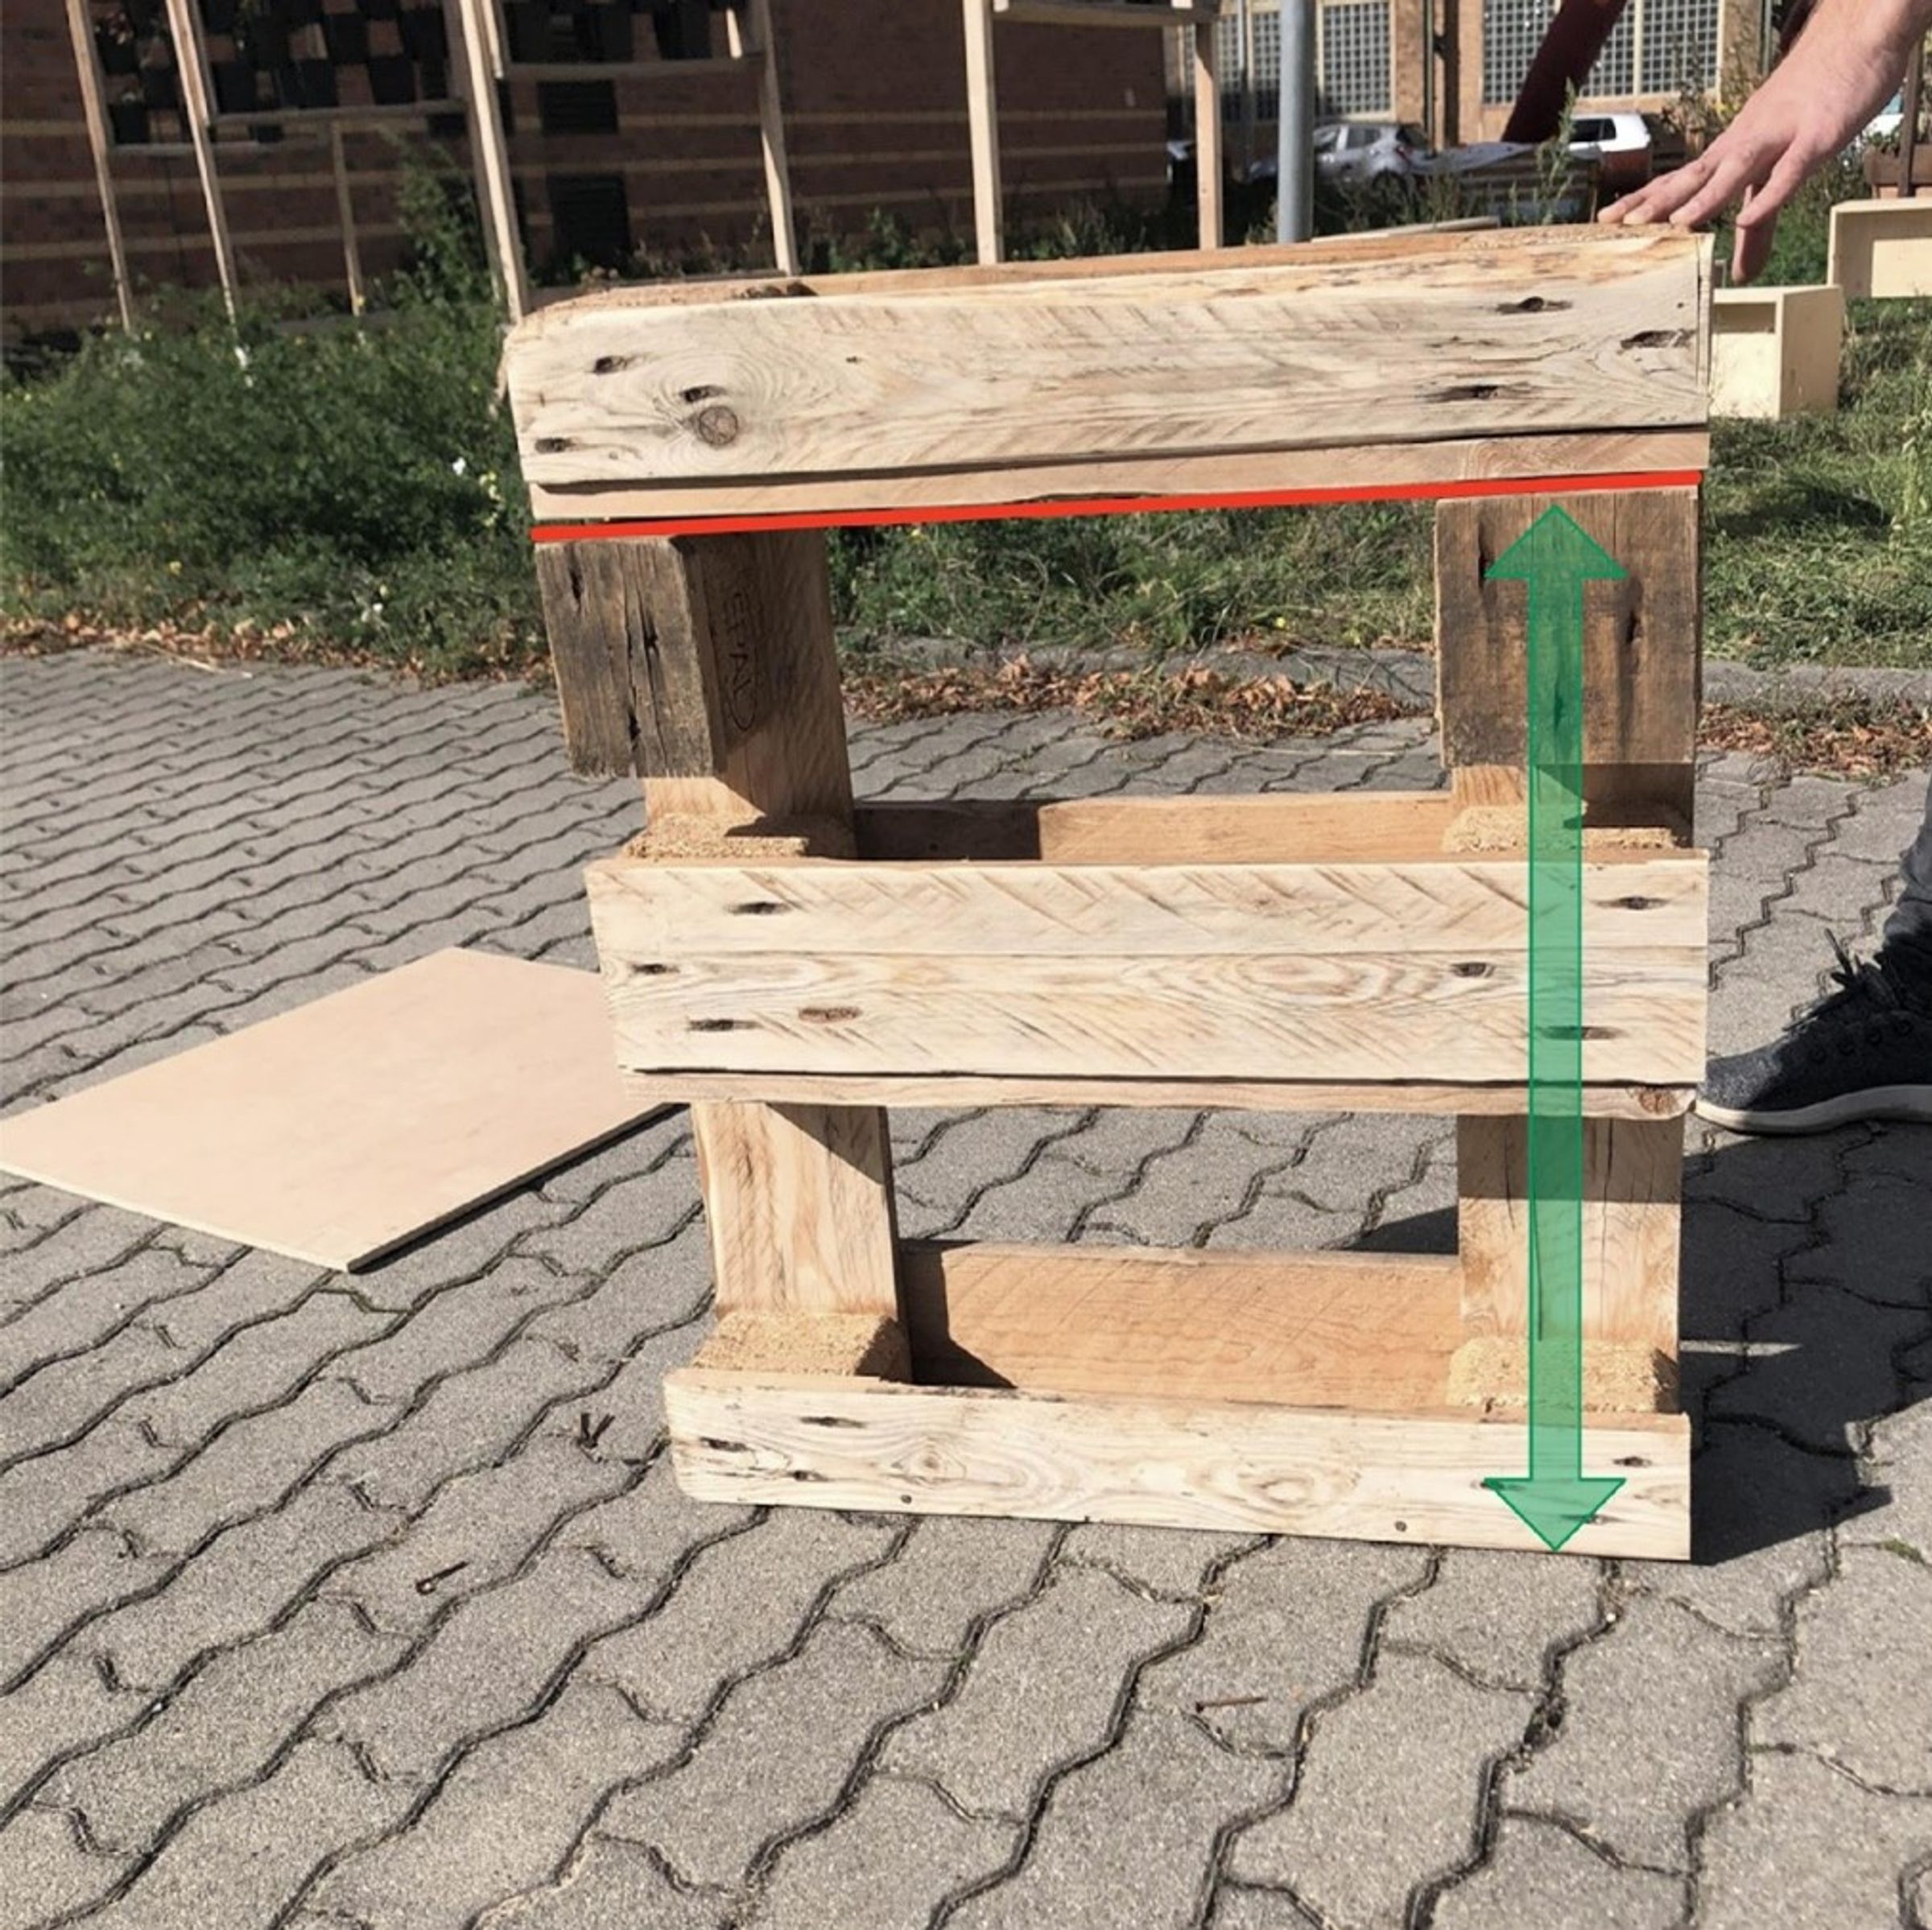 Cut the front legs at the height of the table top